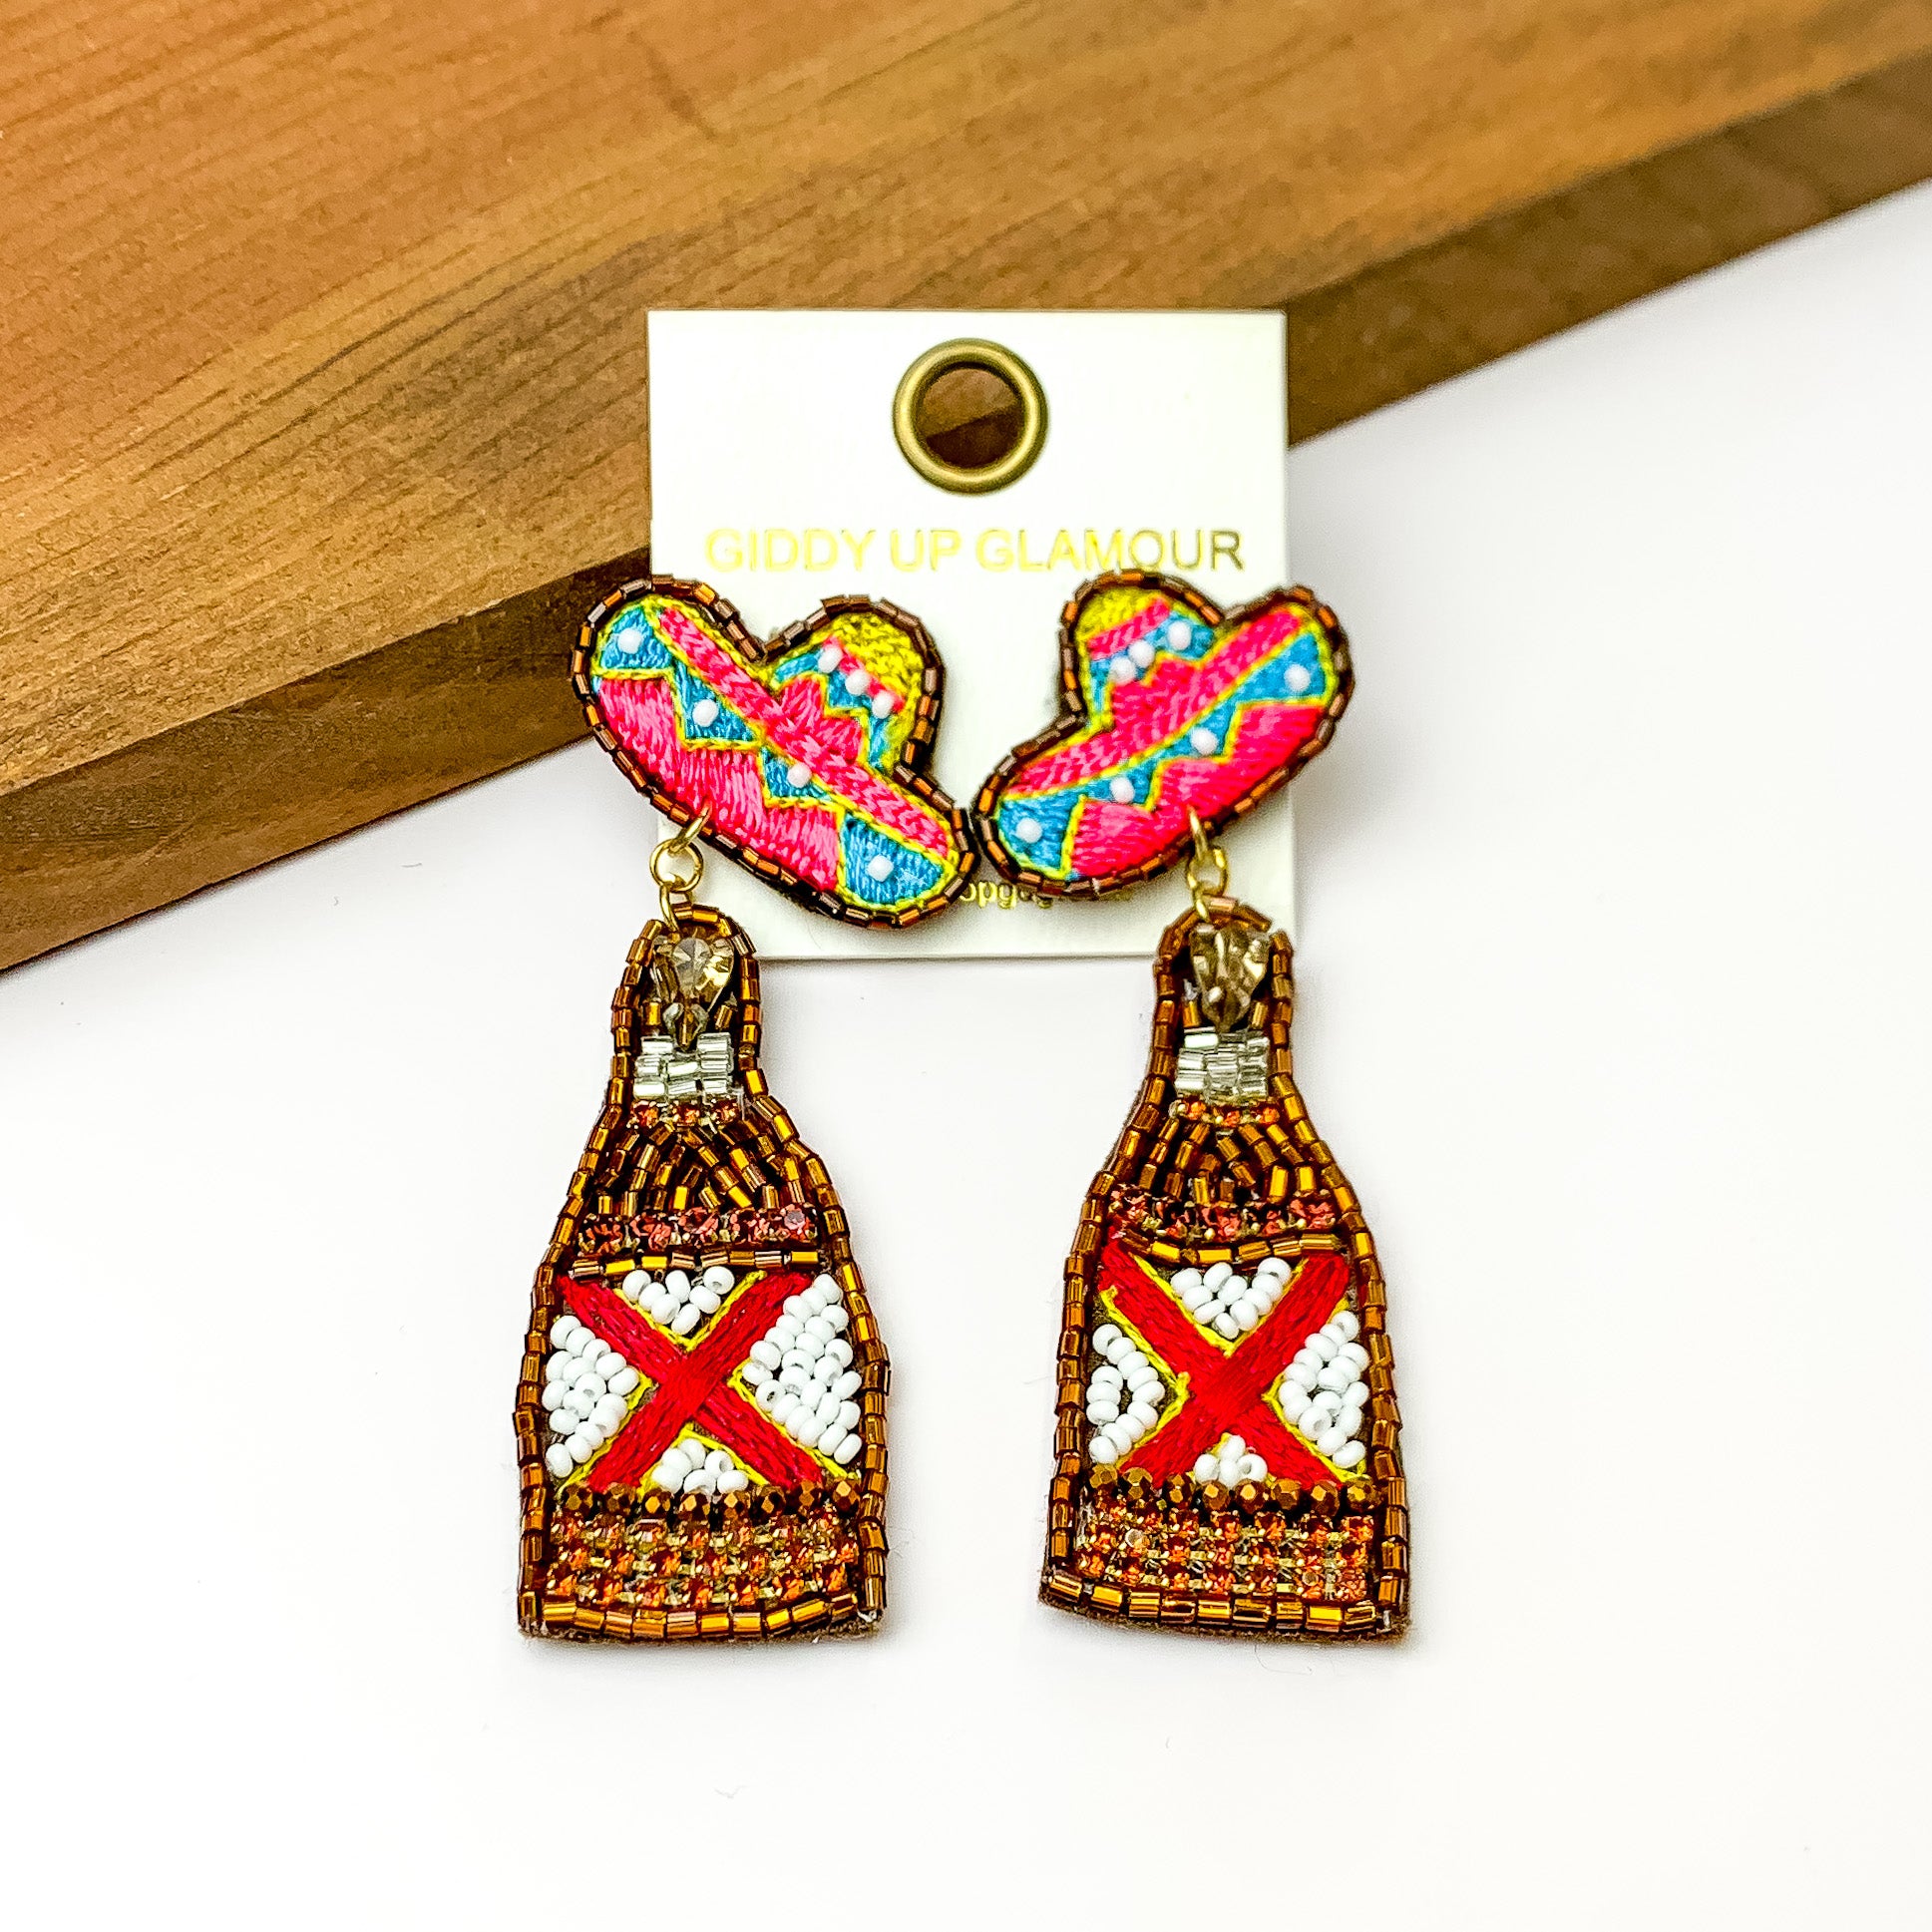 Beaded Gold Beer Bottle Earrings with Sombrero Studs. Pictured on a white background with a wood piece at the top.